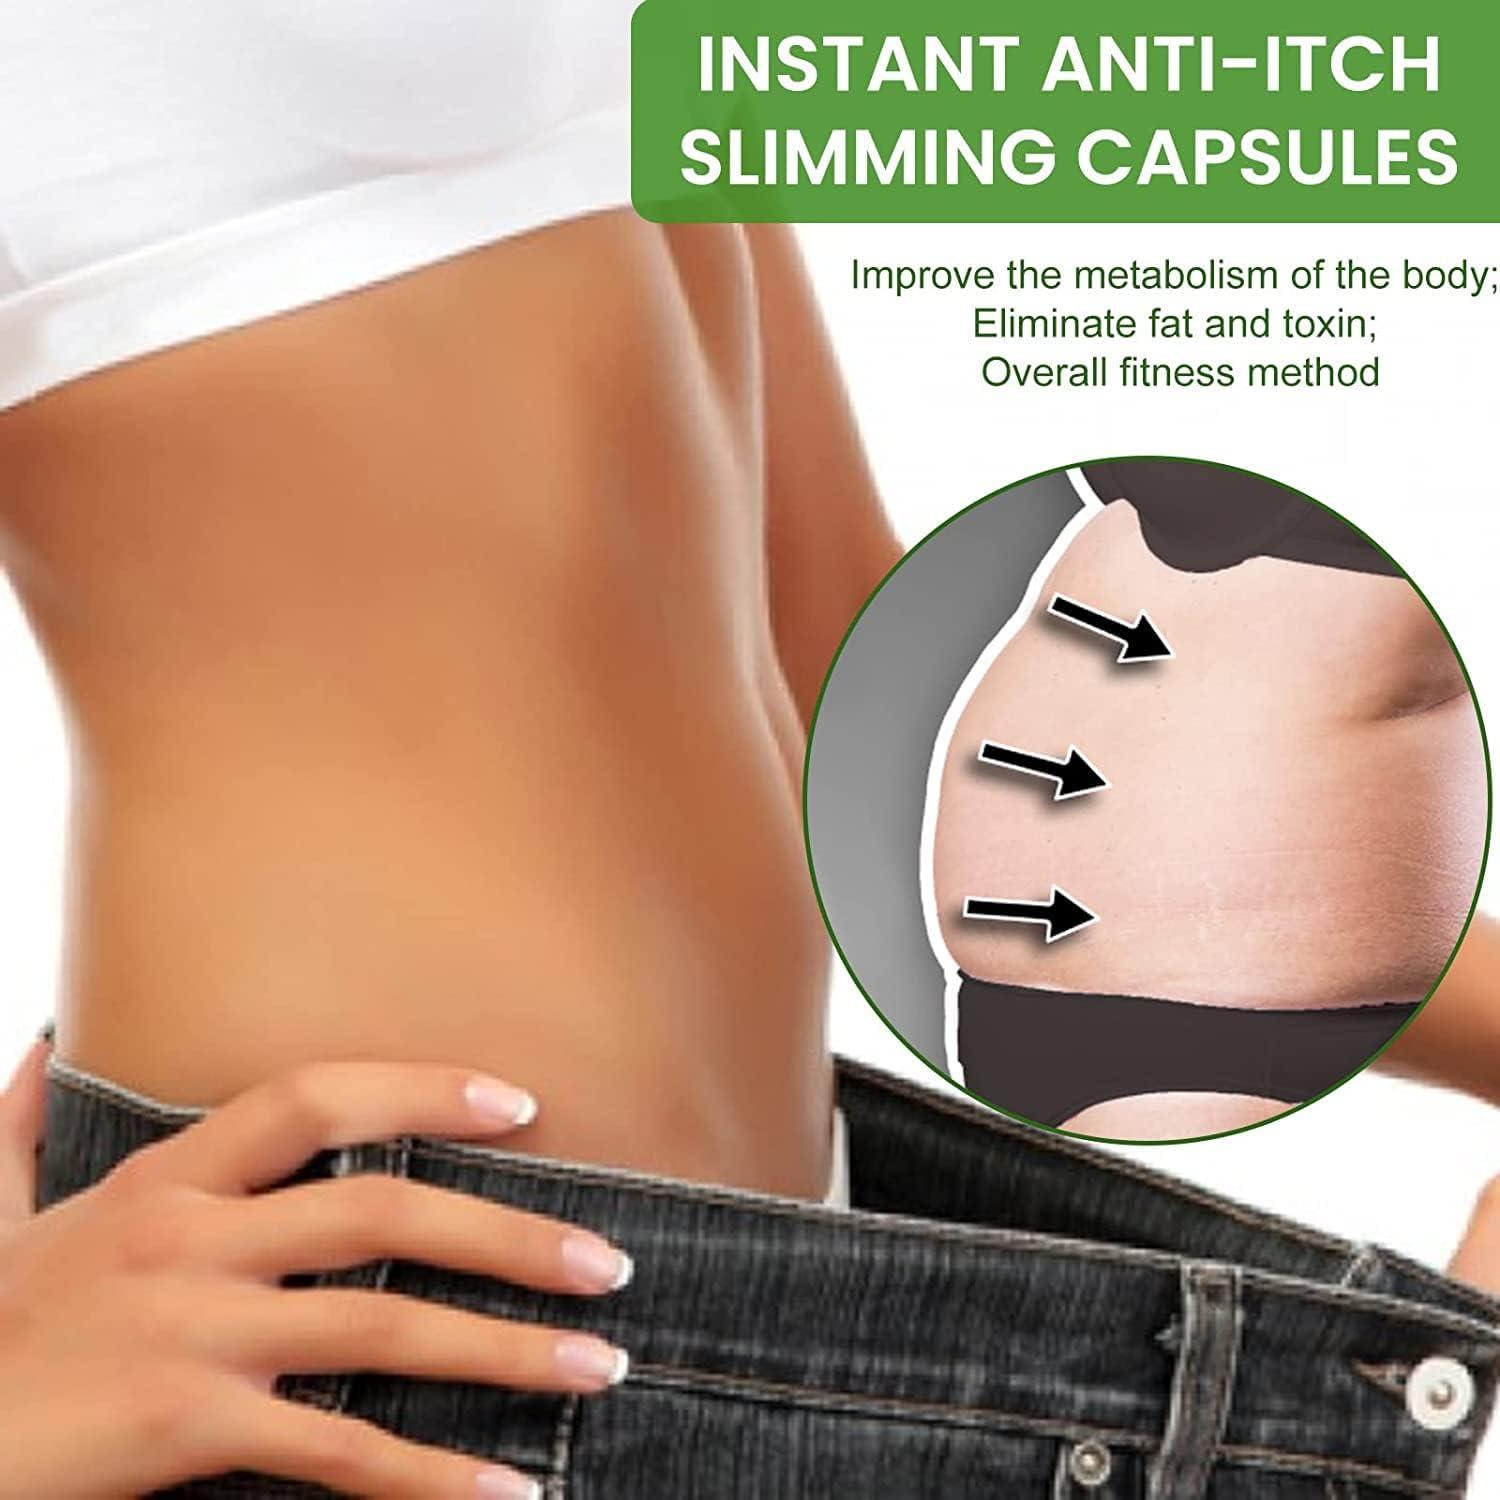 Natural Slimfit Belly Slimming Capsules, Shop Today. Get it Tomorrow!